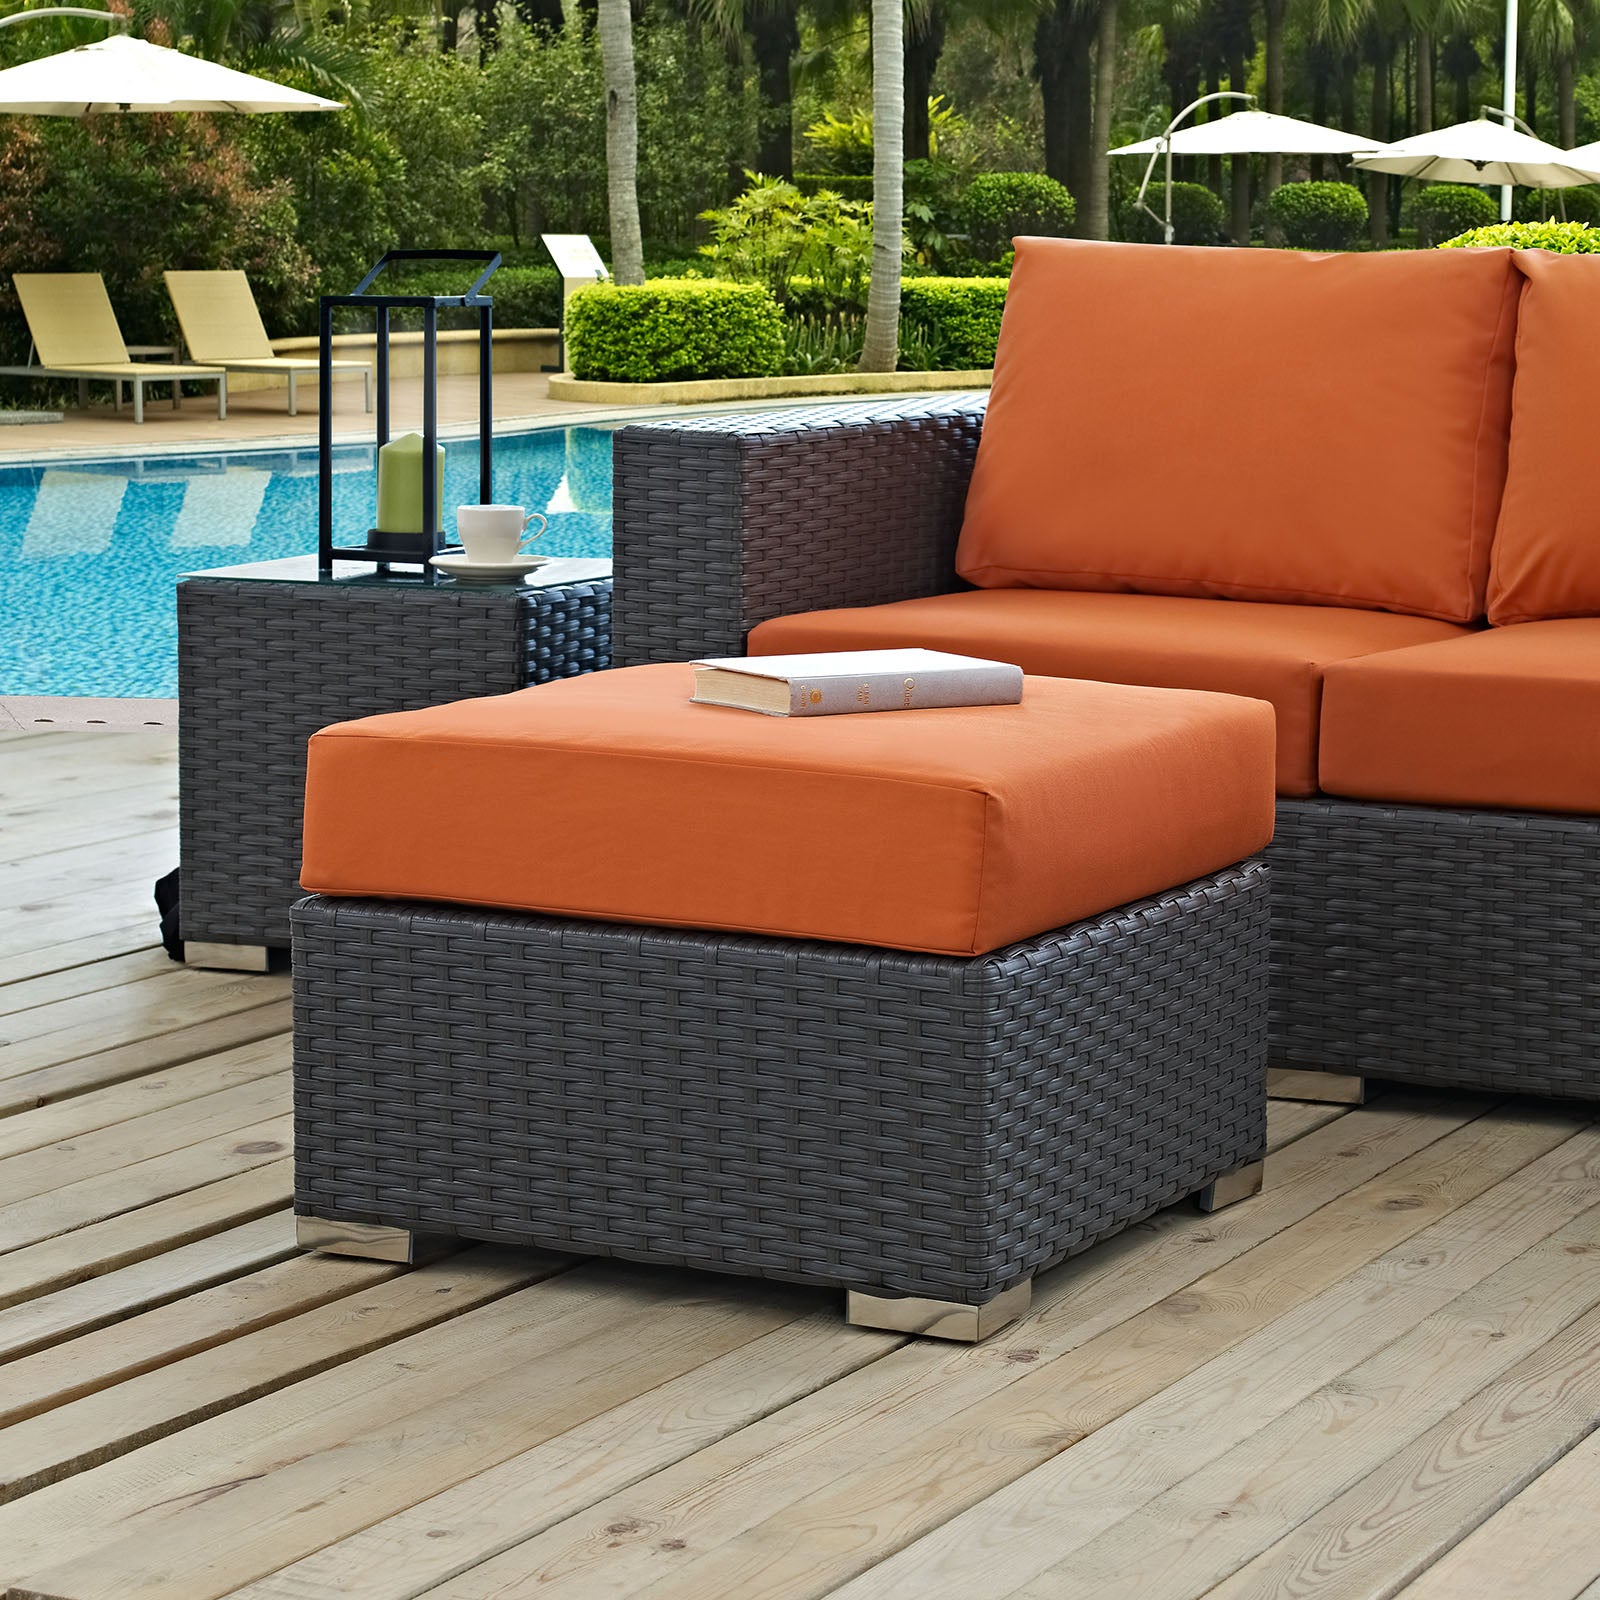 Modway Outdoor Stools & Benches - Sojourn Outdoor Patio Sunbrella Ottoman Canvas Tuscan